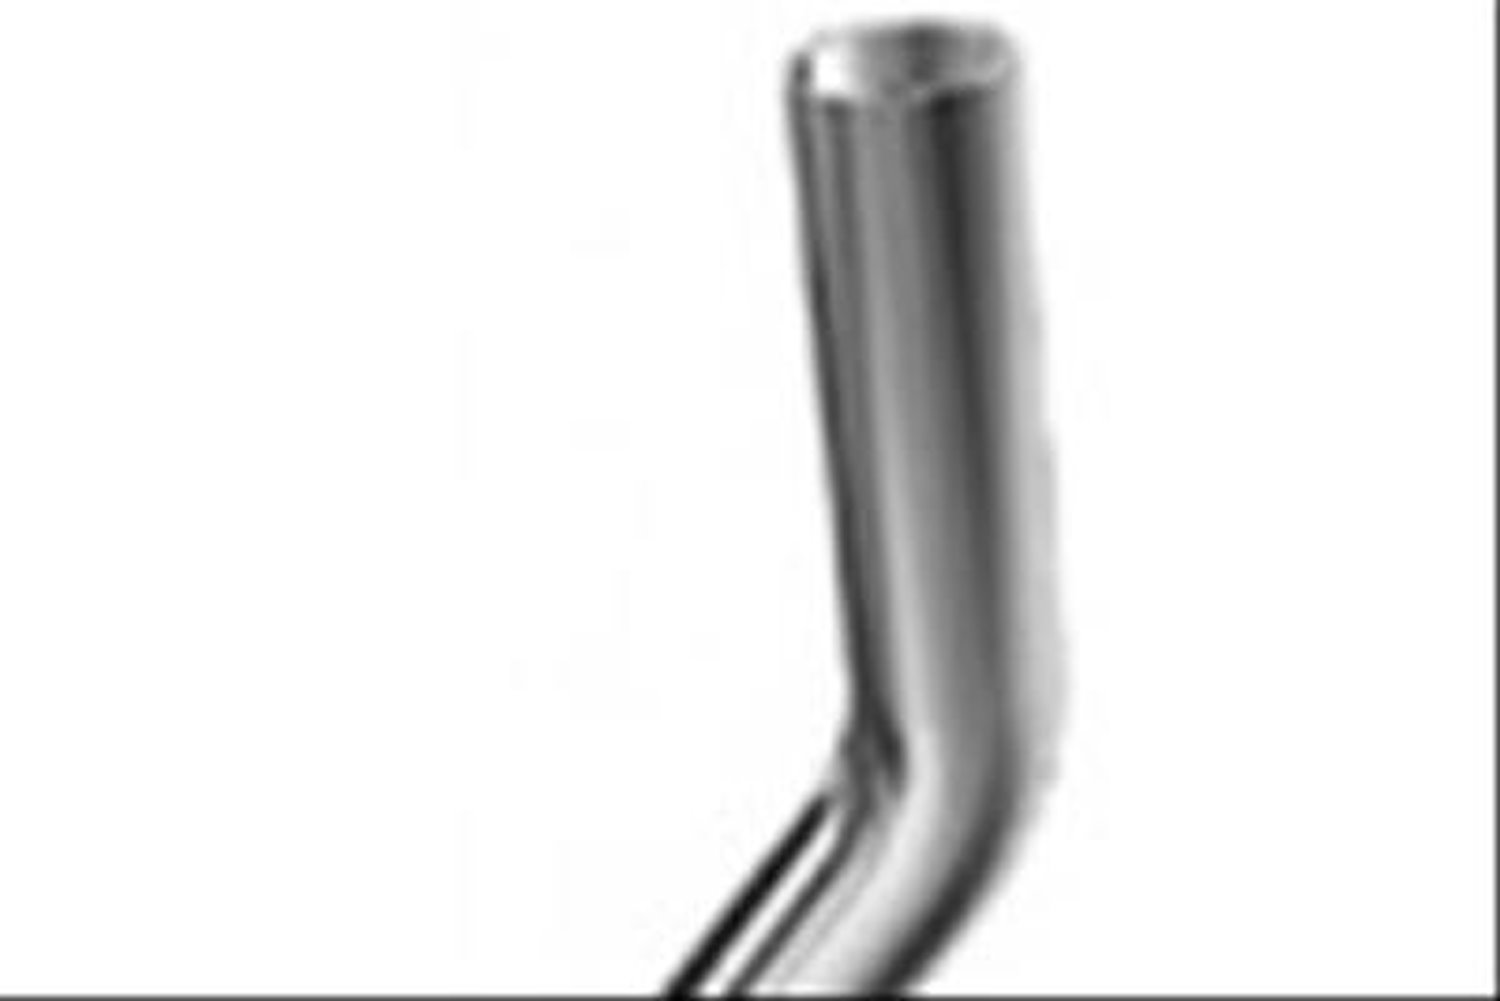 Stainless Exhaust Tubing 45 Degree Bend 4 in Radius - Legs 6 in x 6 in